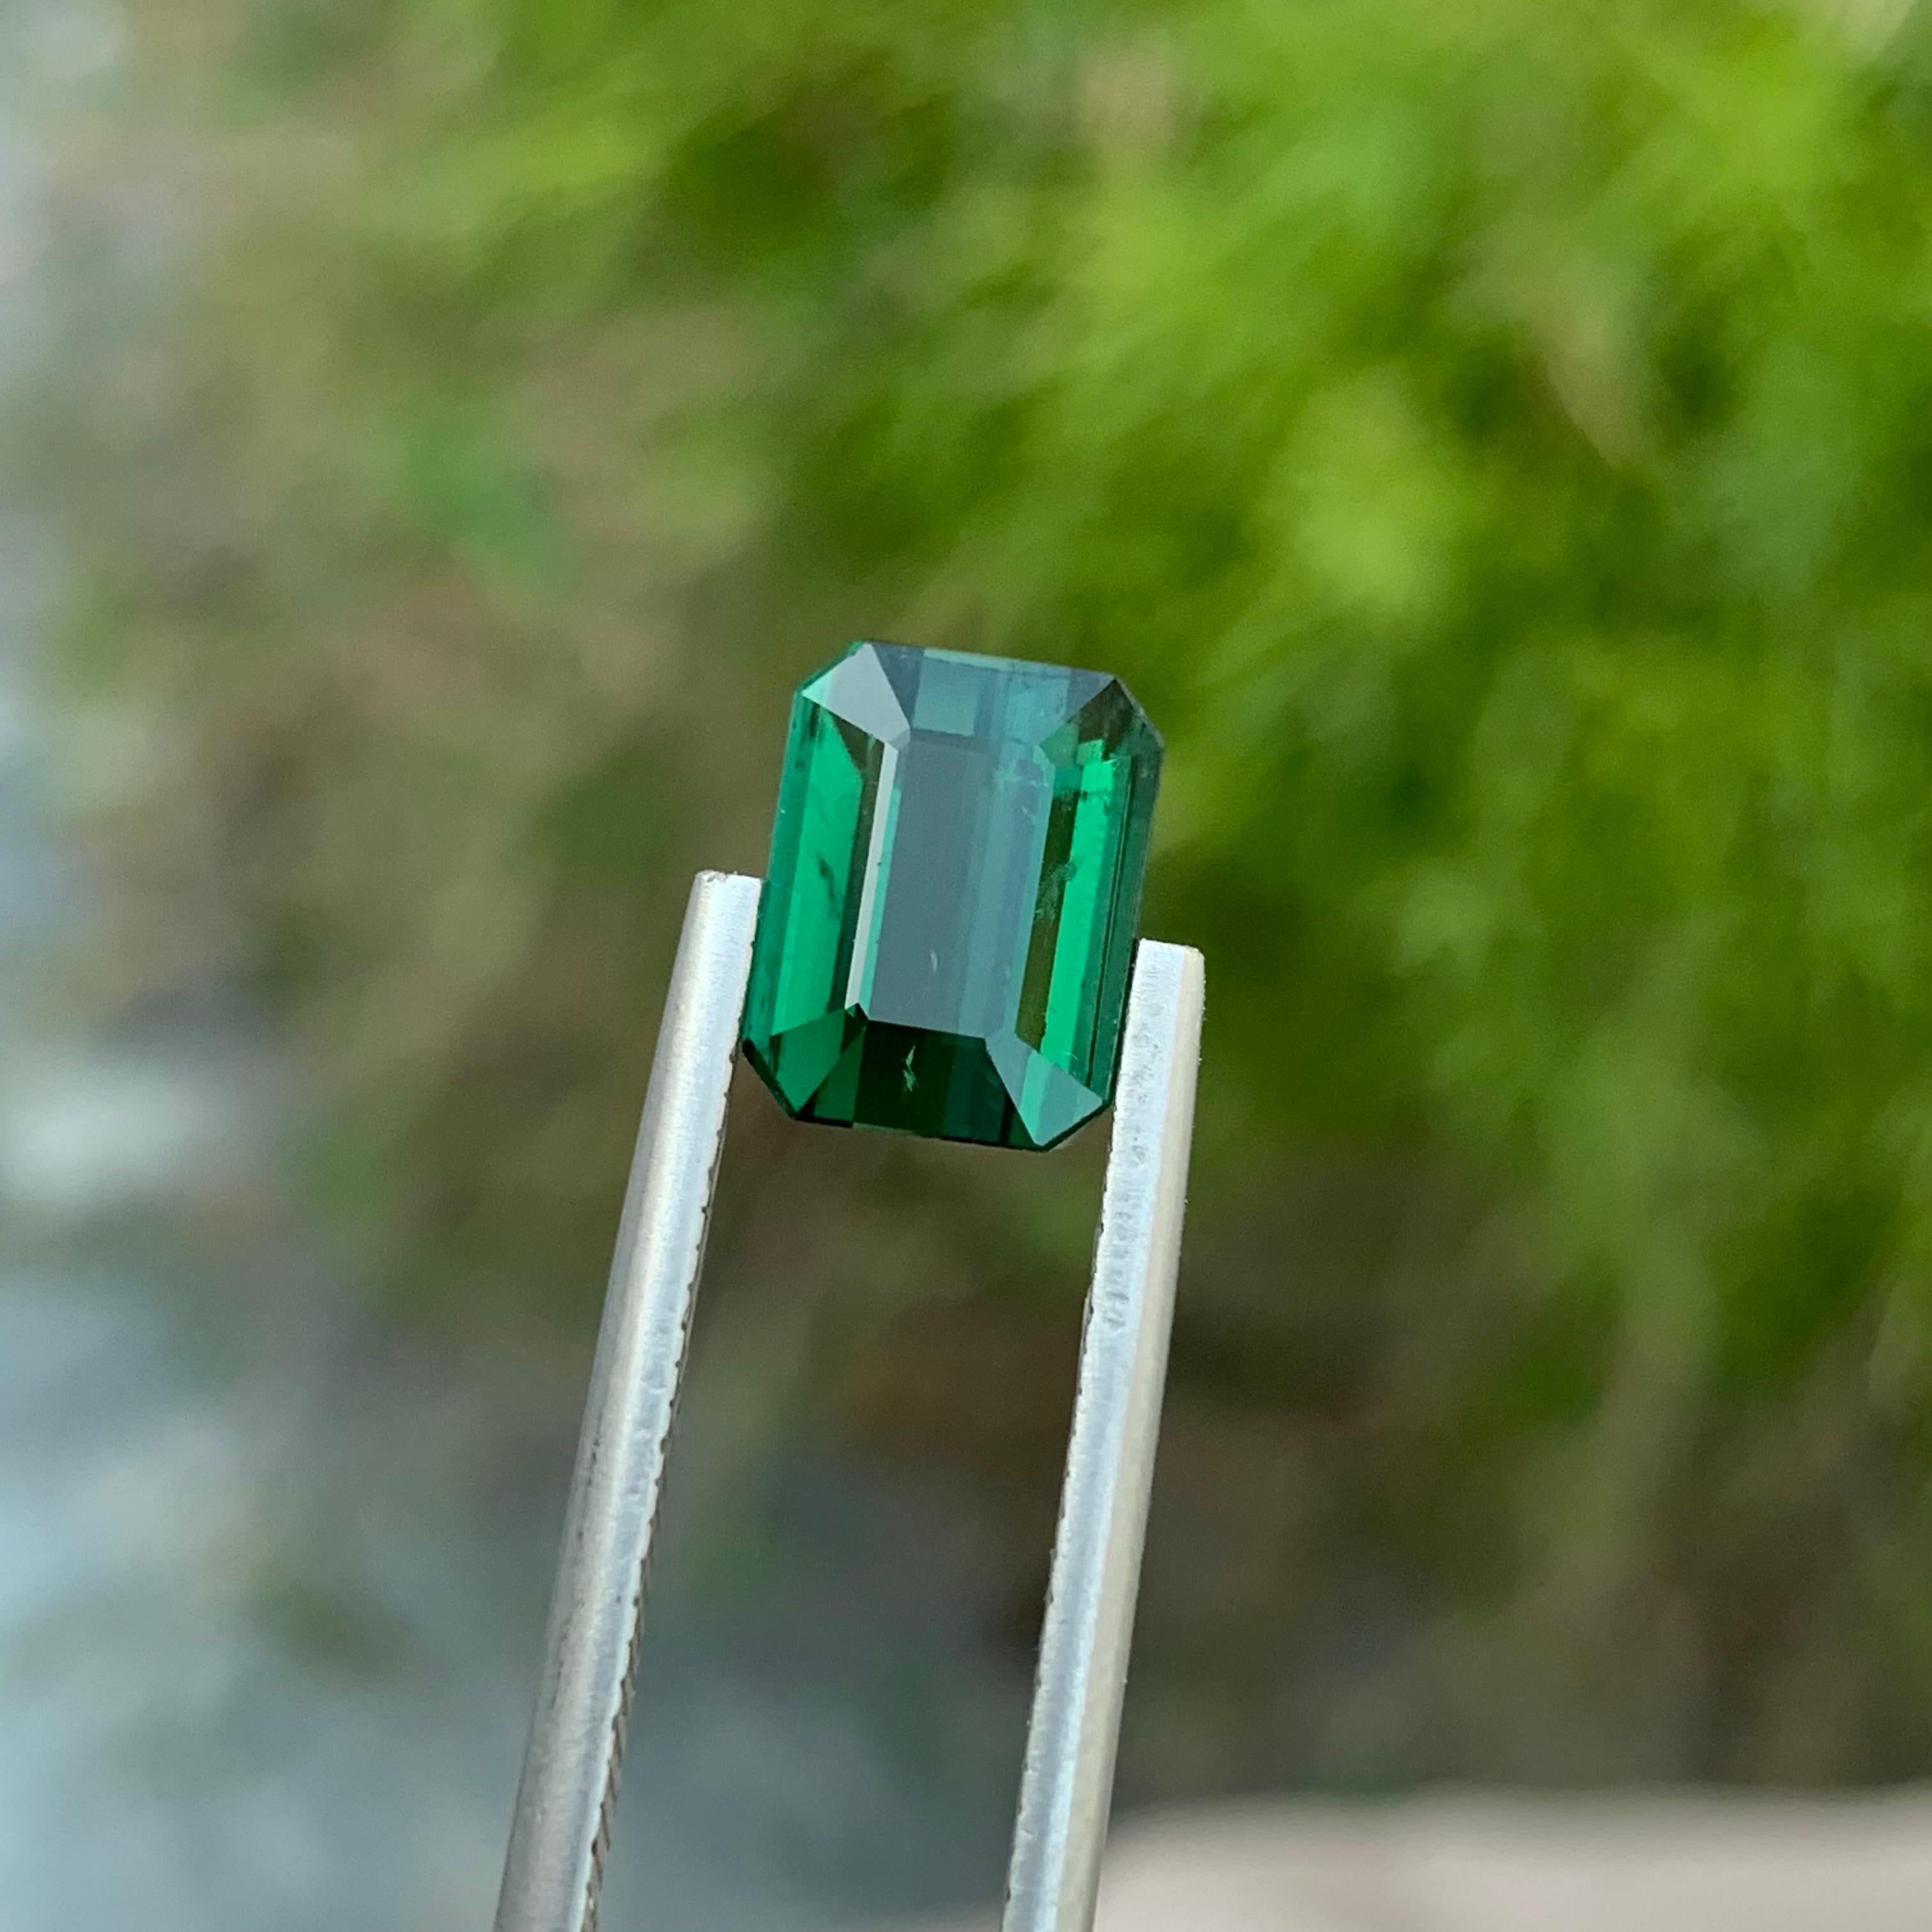 2.85 Carat Natural Loose Green Tourmaline Emerald Shape Gem From Earth Mine For Sale 4